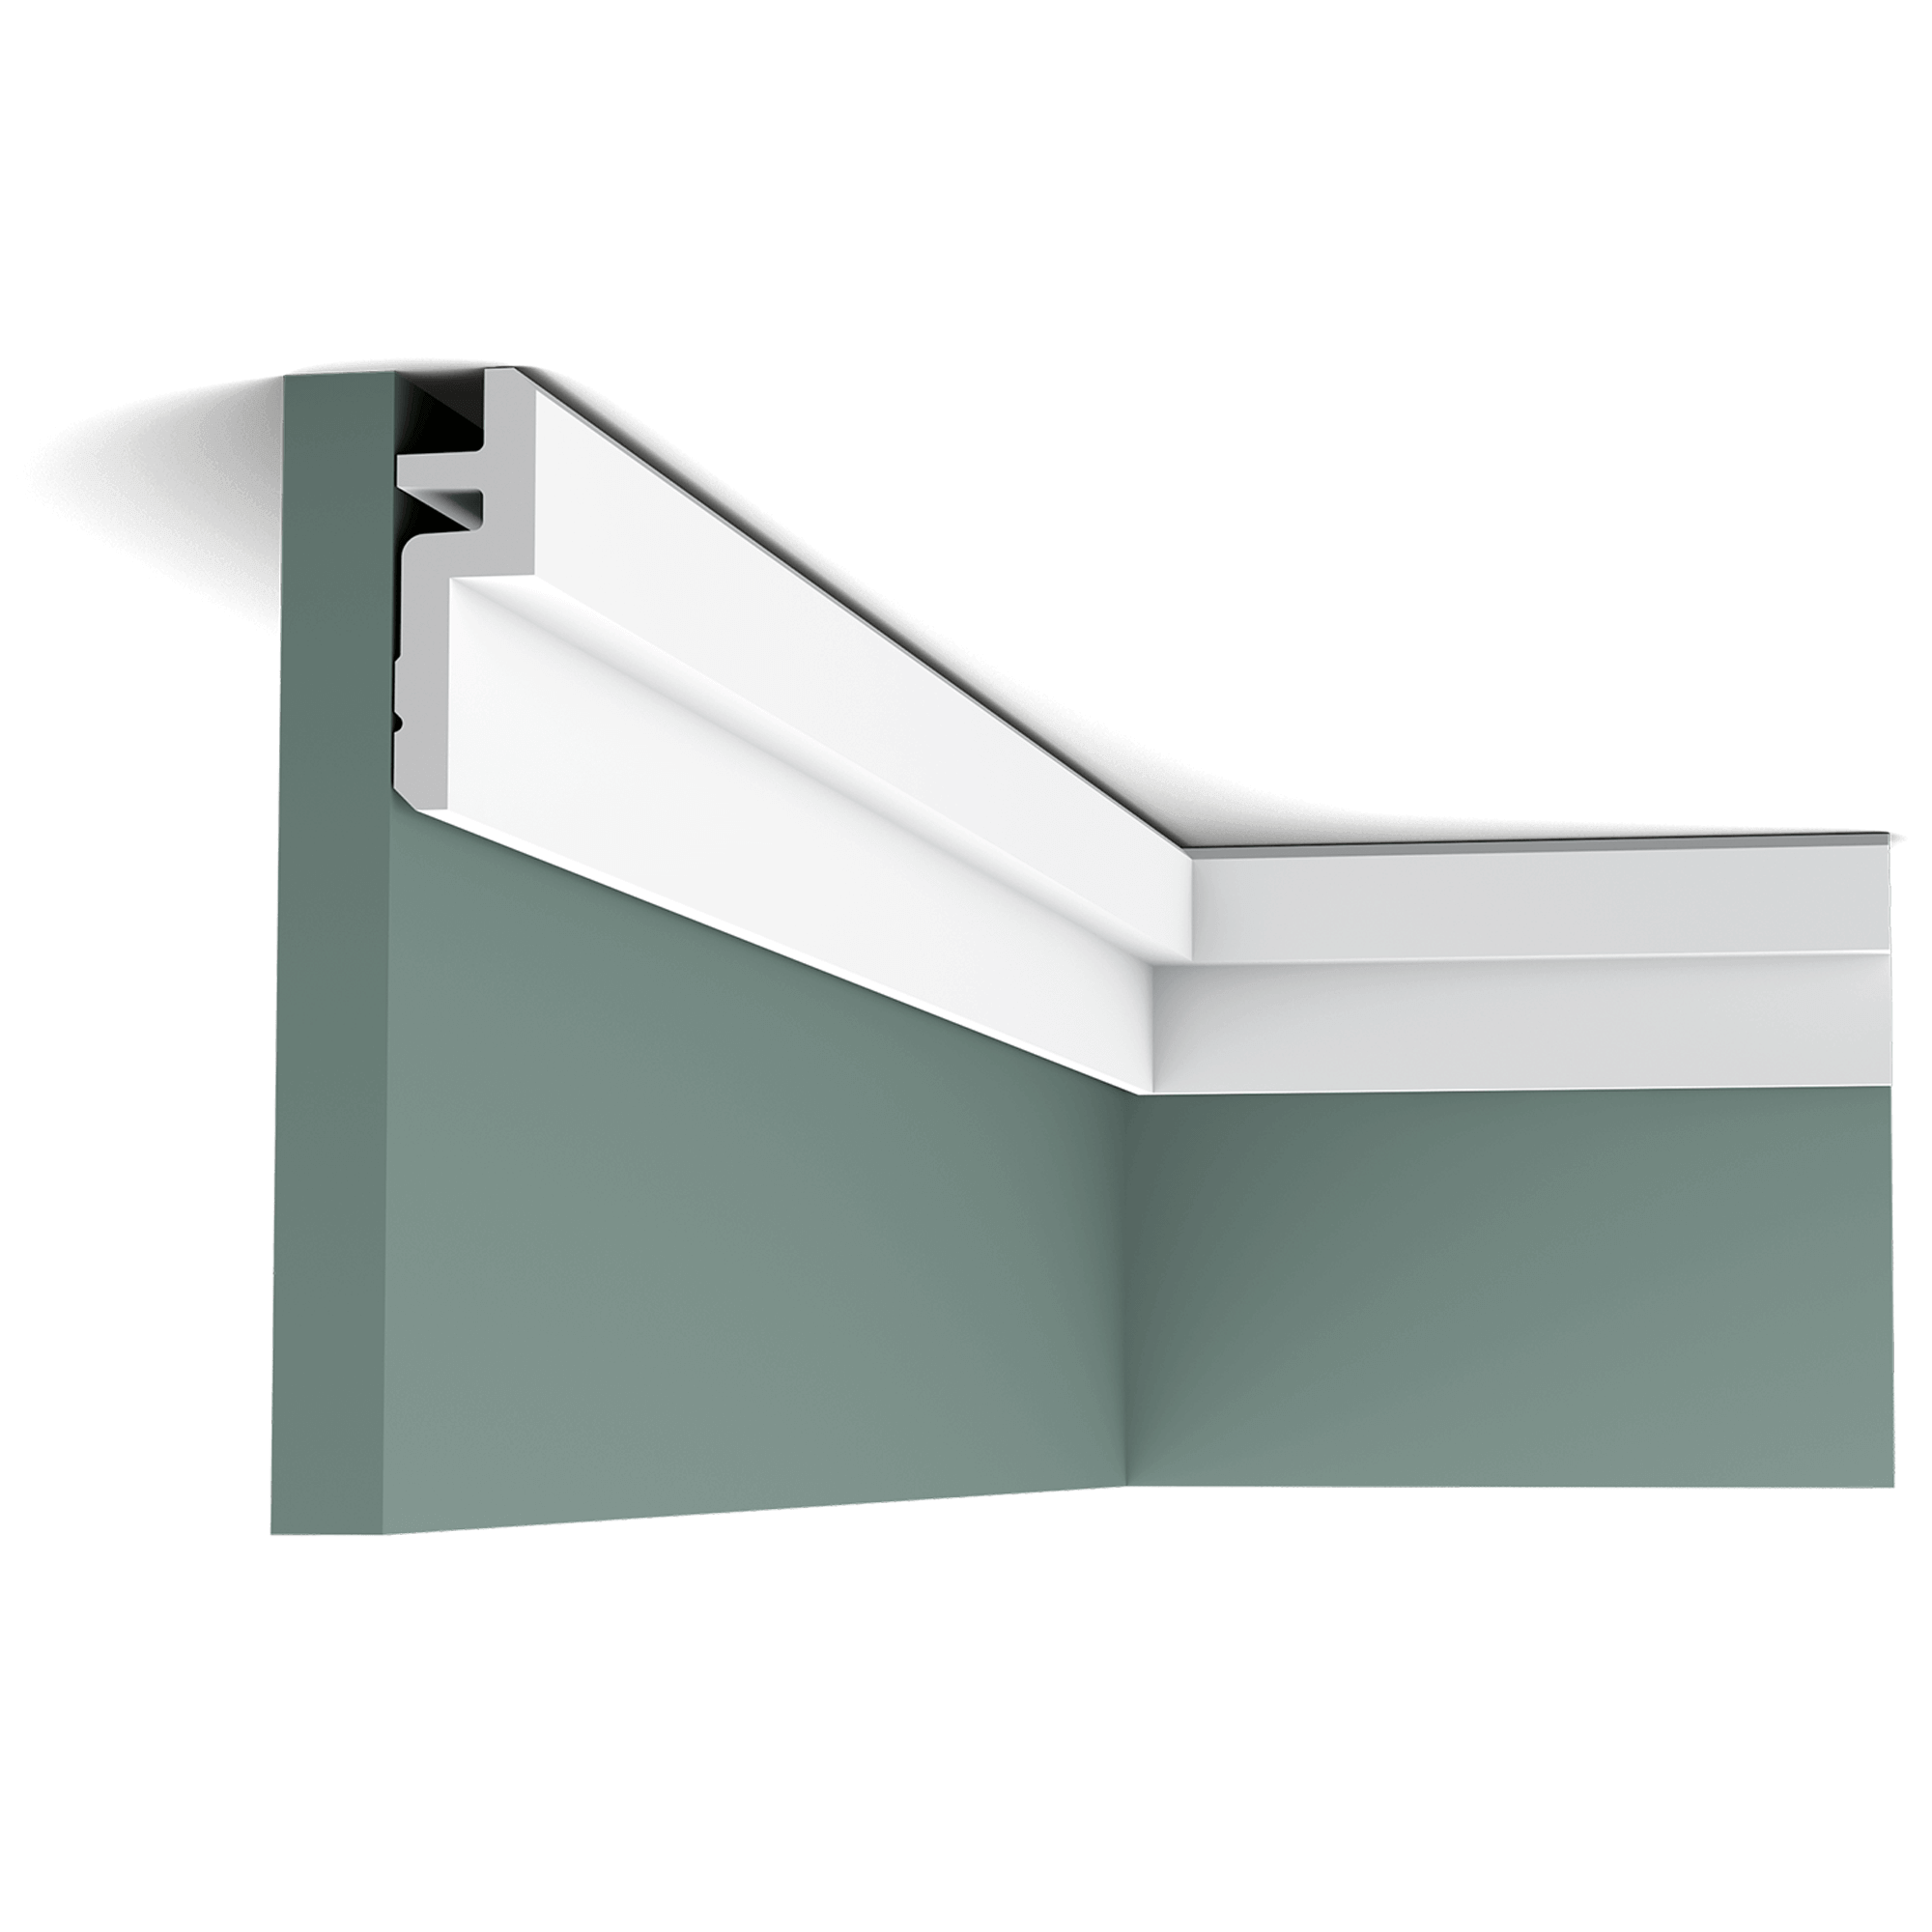 c394 border 701b A clean, modern profile from the Steps range. Here we fix the largest section to the wall for an elevated effect. The angled corners above and below provide additional subtle shadow lines. Designed by Orio Tonini.